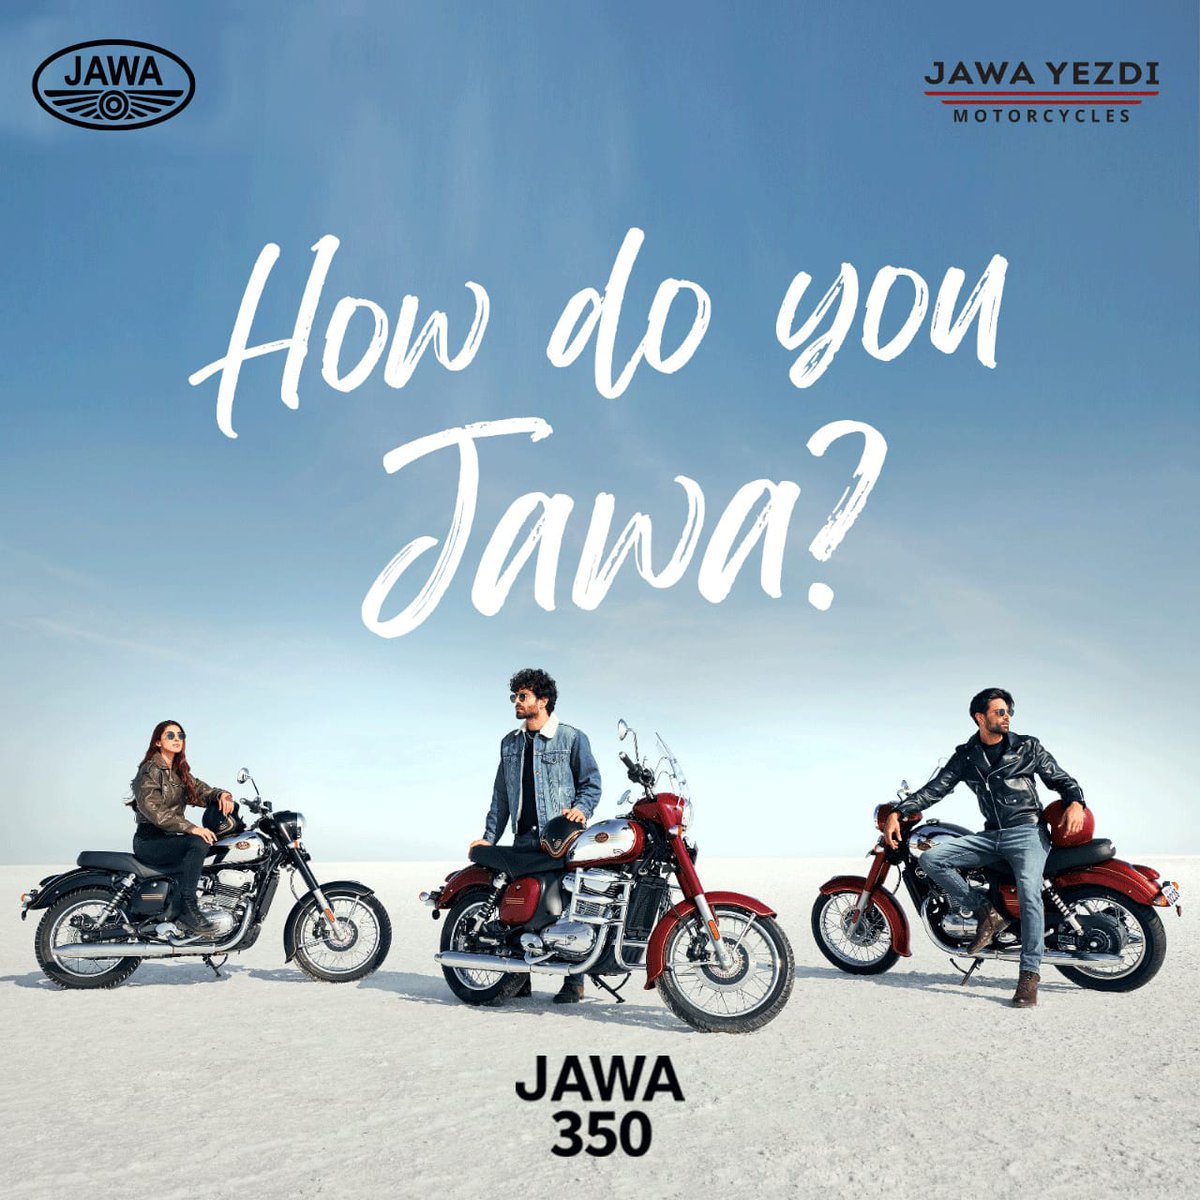 The thrill that has forever run in your blood is now ready to run on the streets as well. A timeless combination of beauty, class and performance is all set to make an unforgettable return. Reimagined for the modern rider, the classic Jawa 350 is now ready. Are you? #Jawa…